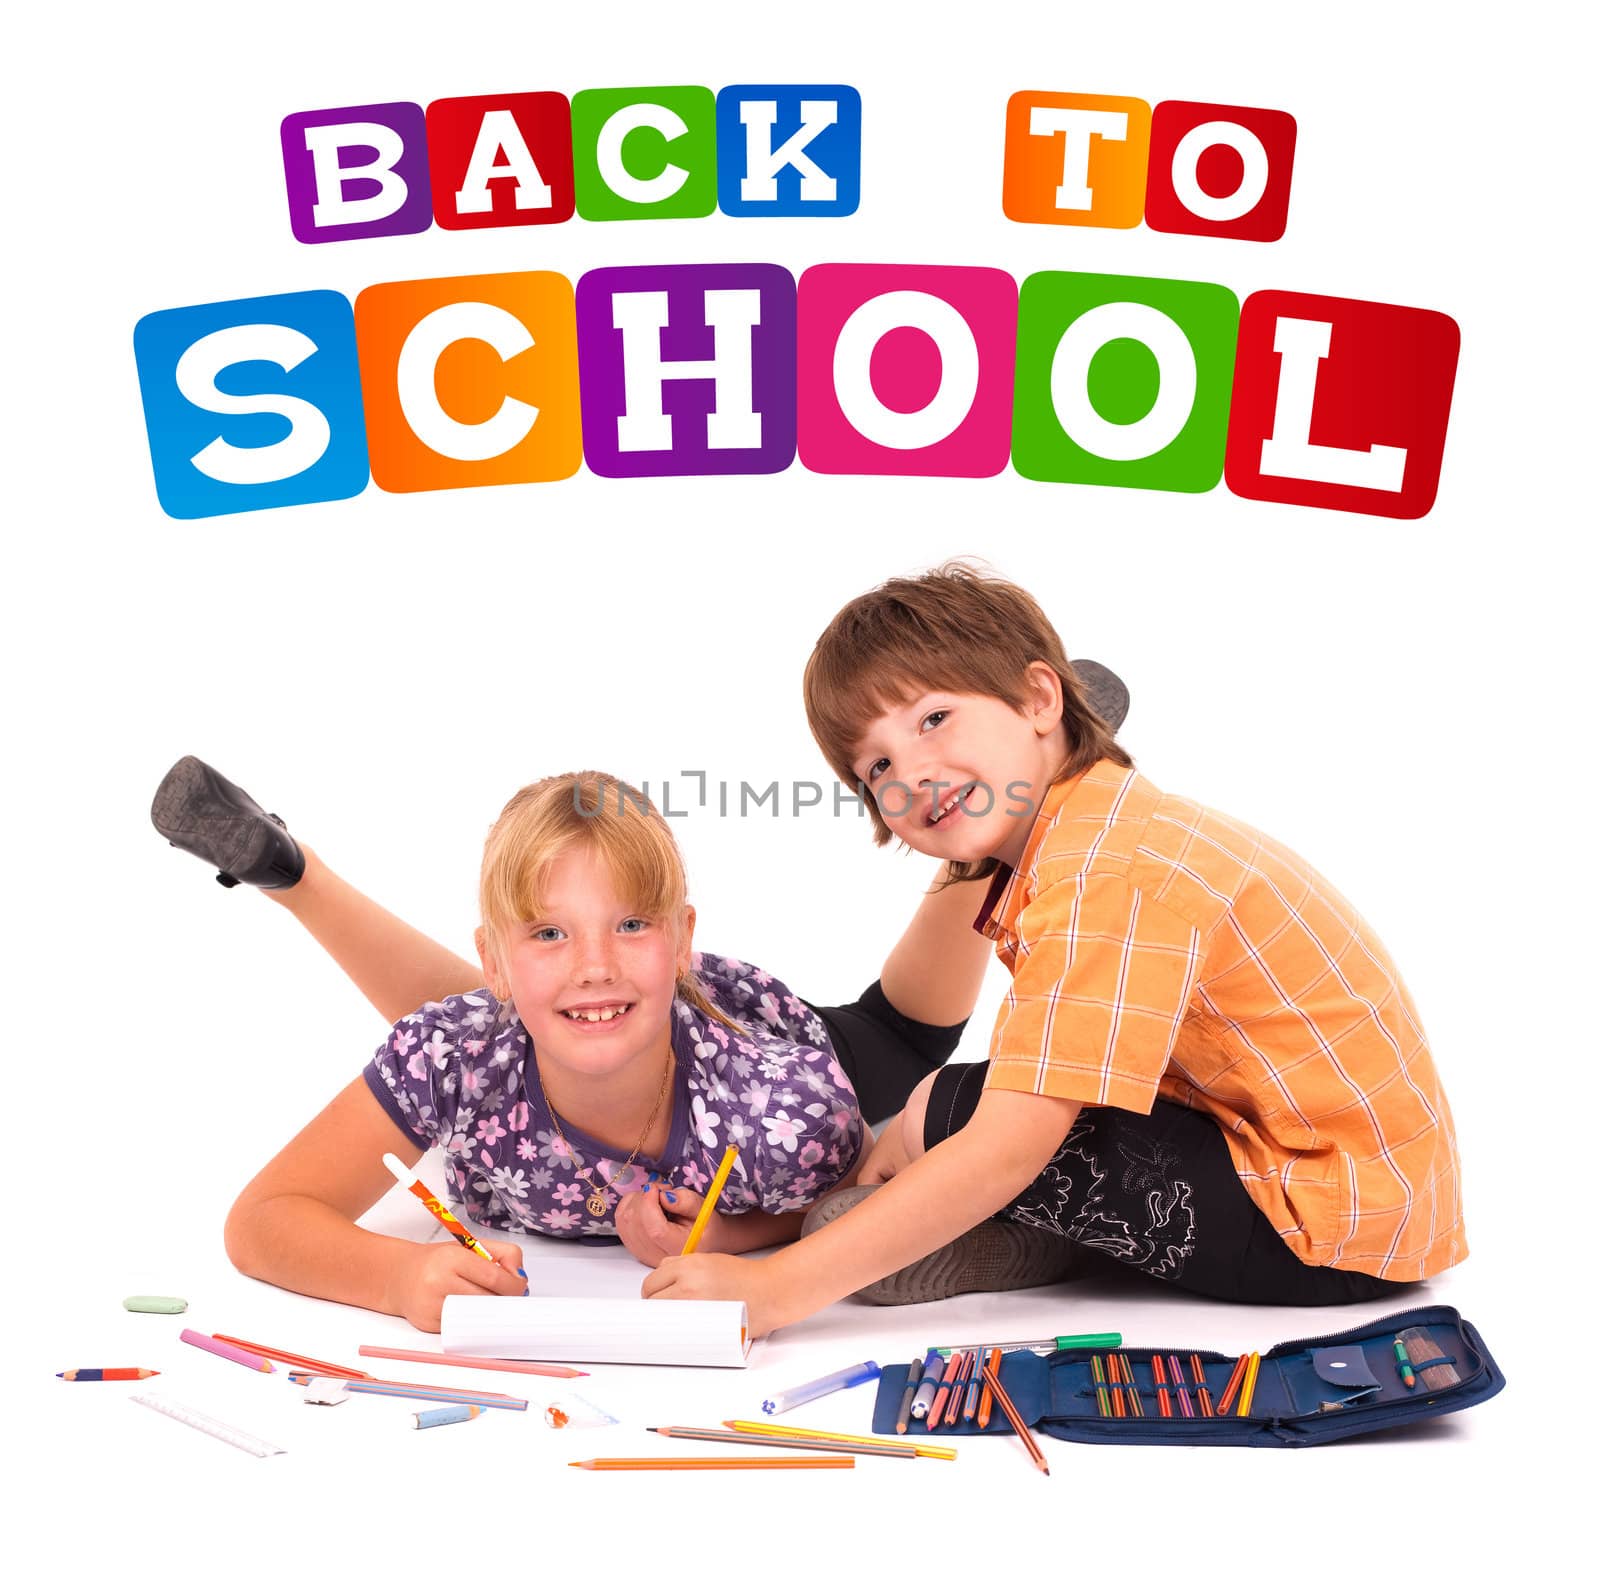 kids posing for back to school theme by ra2studio